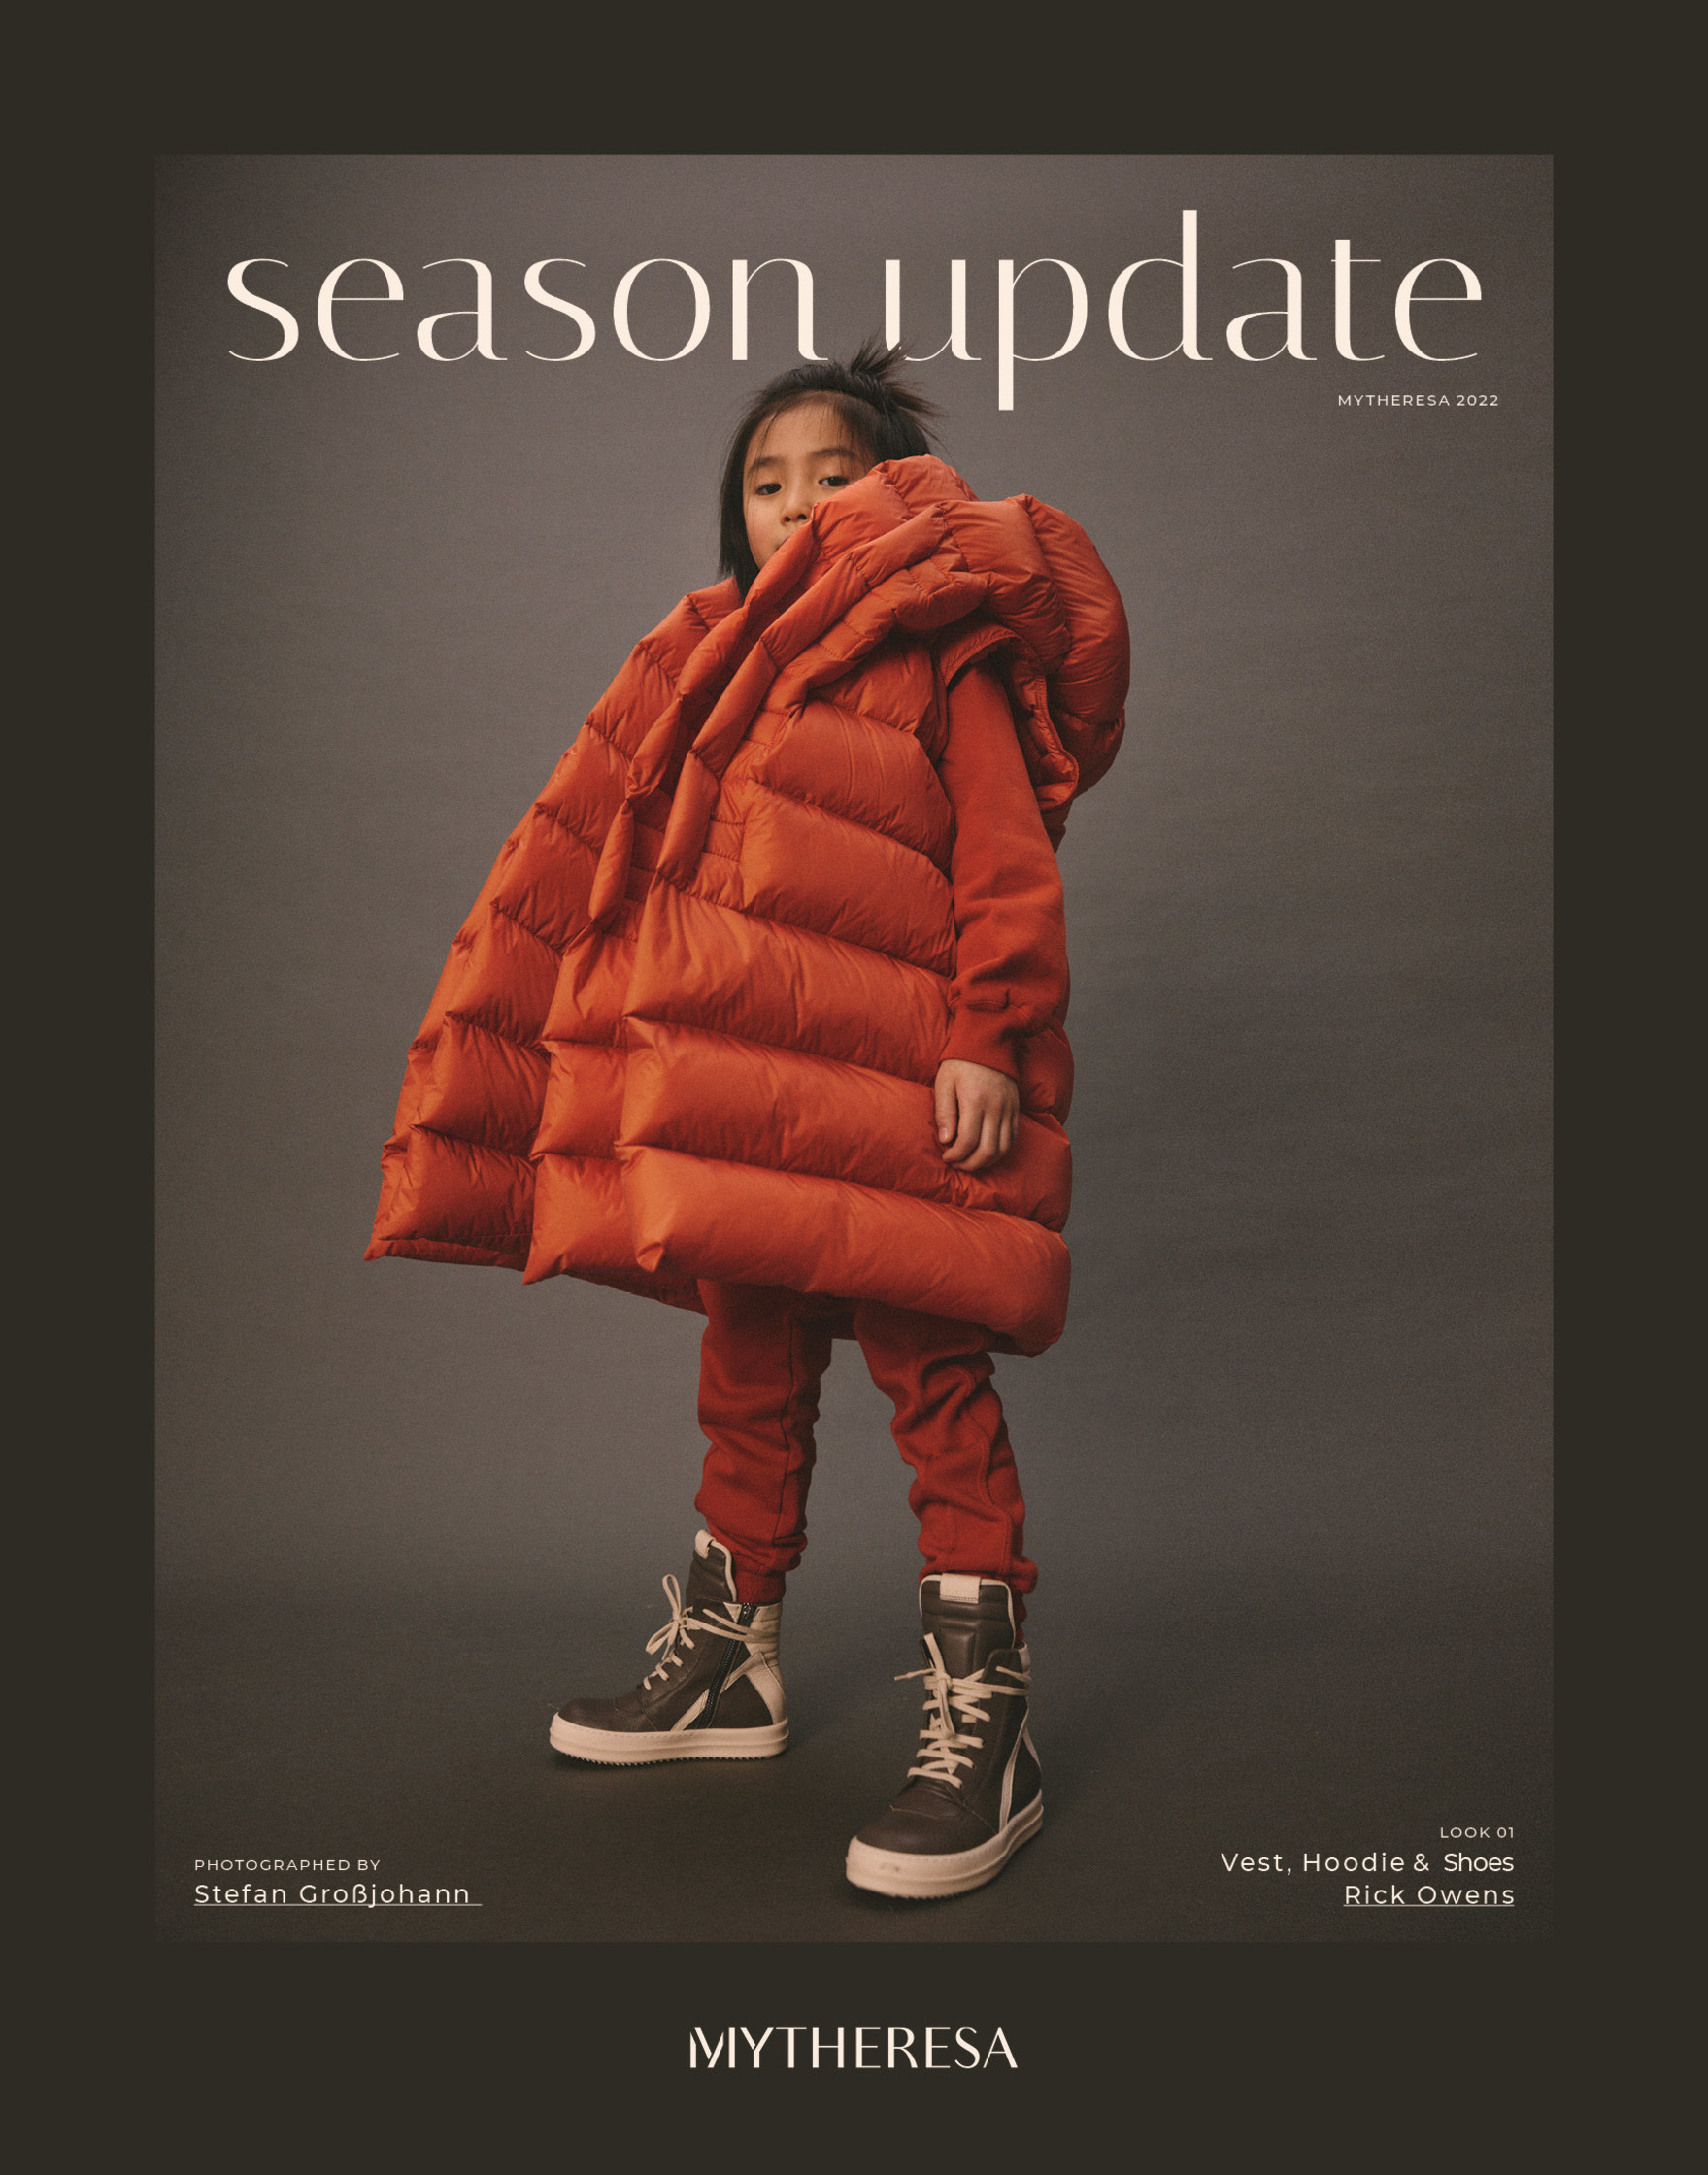 a young boy in an orange puffer jacket on the cover of season update